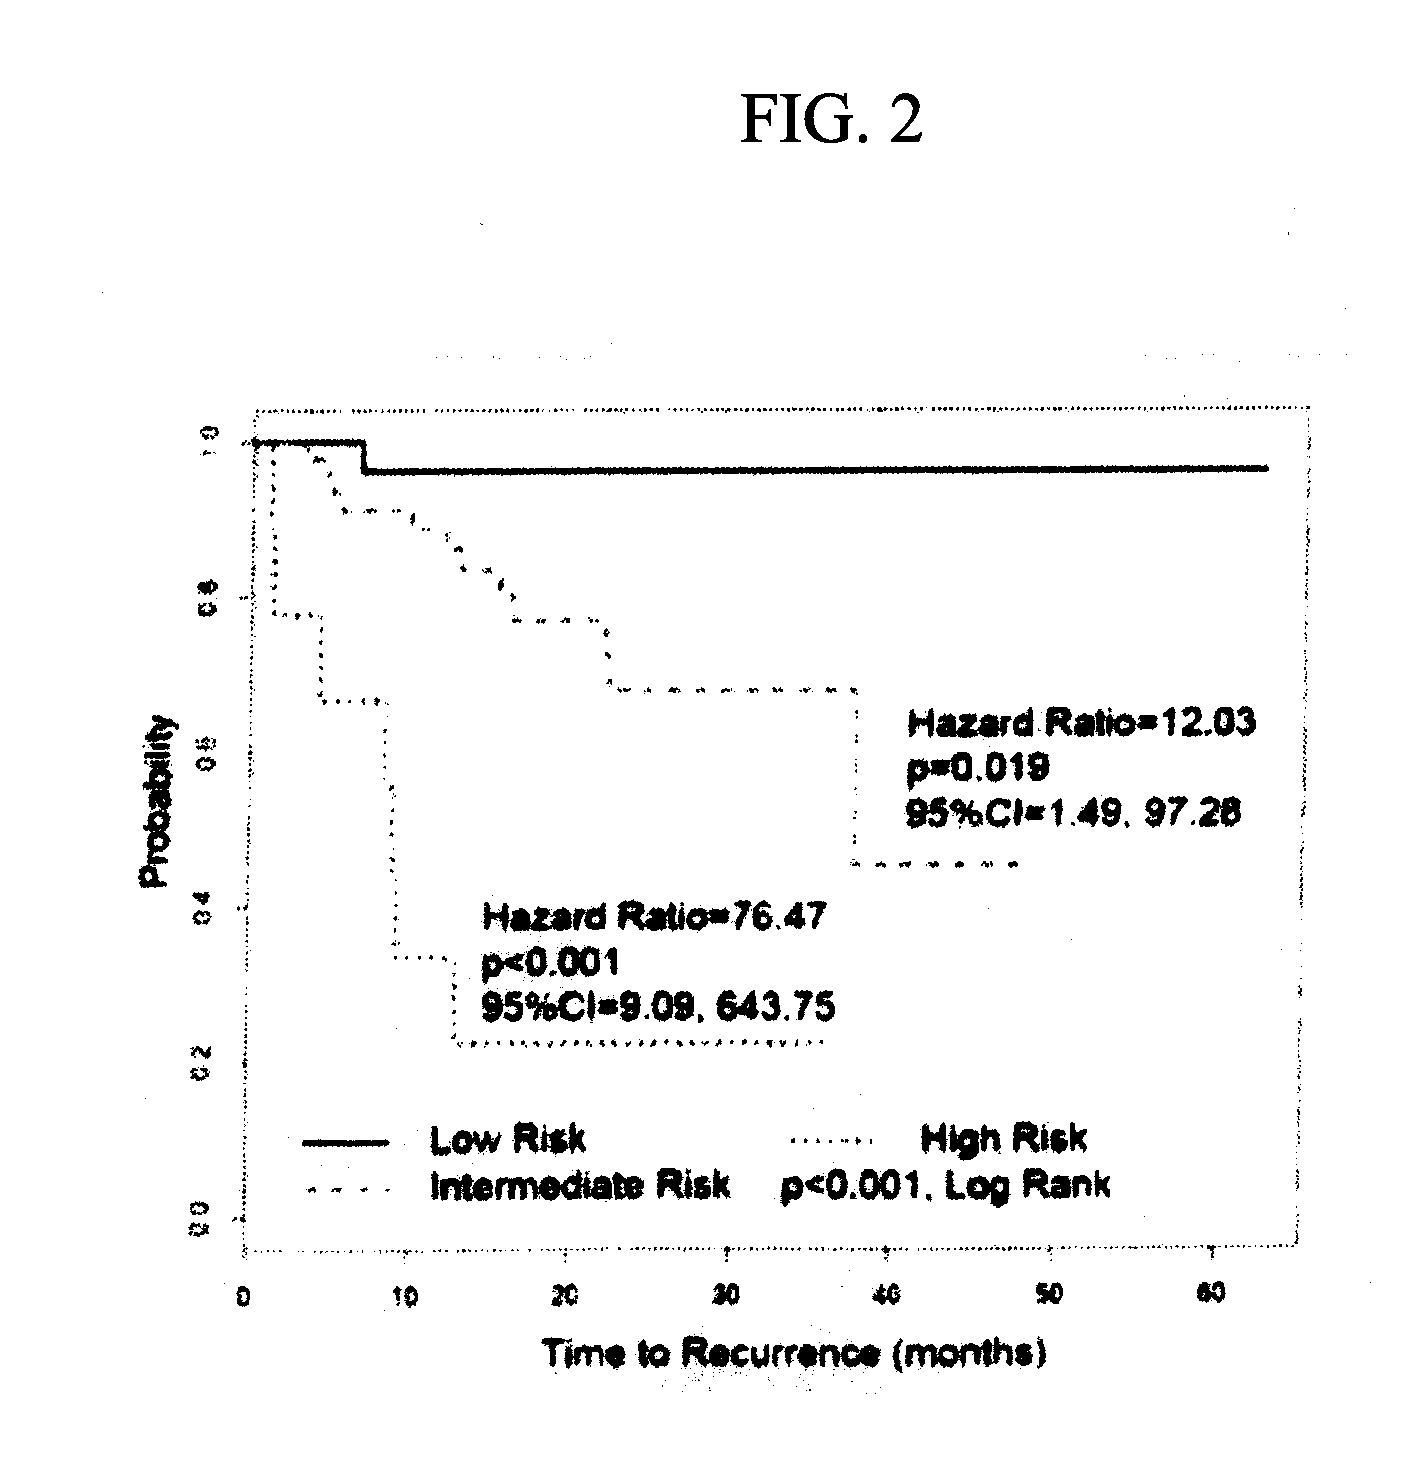 System for and method of determining cancer prognosis and predicting response to therapy